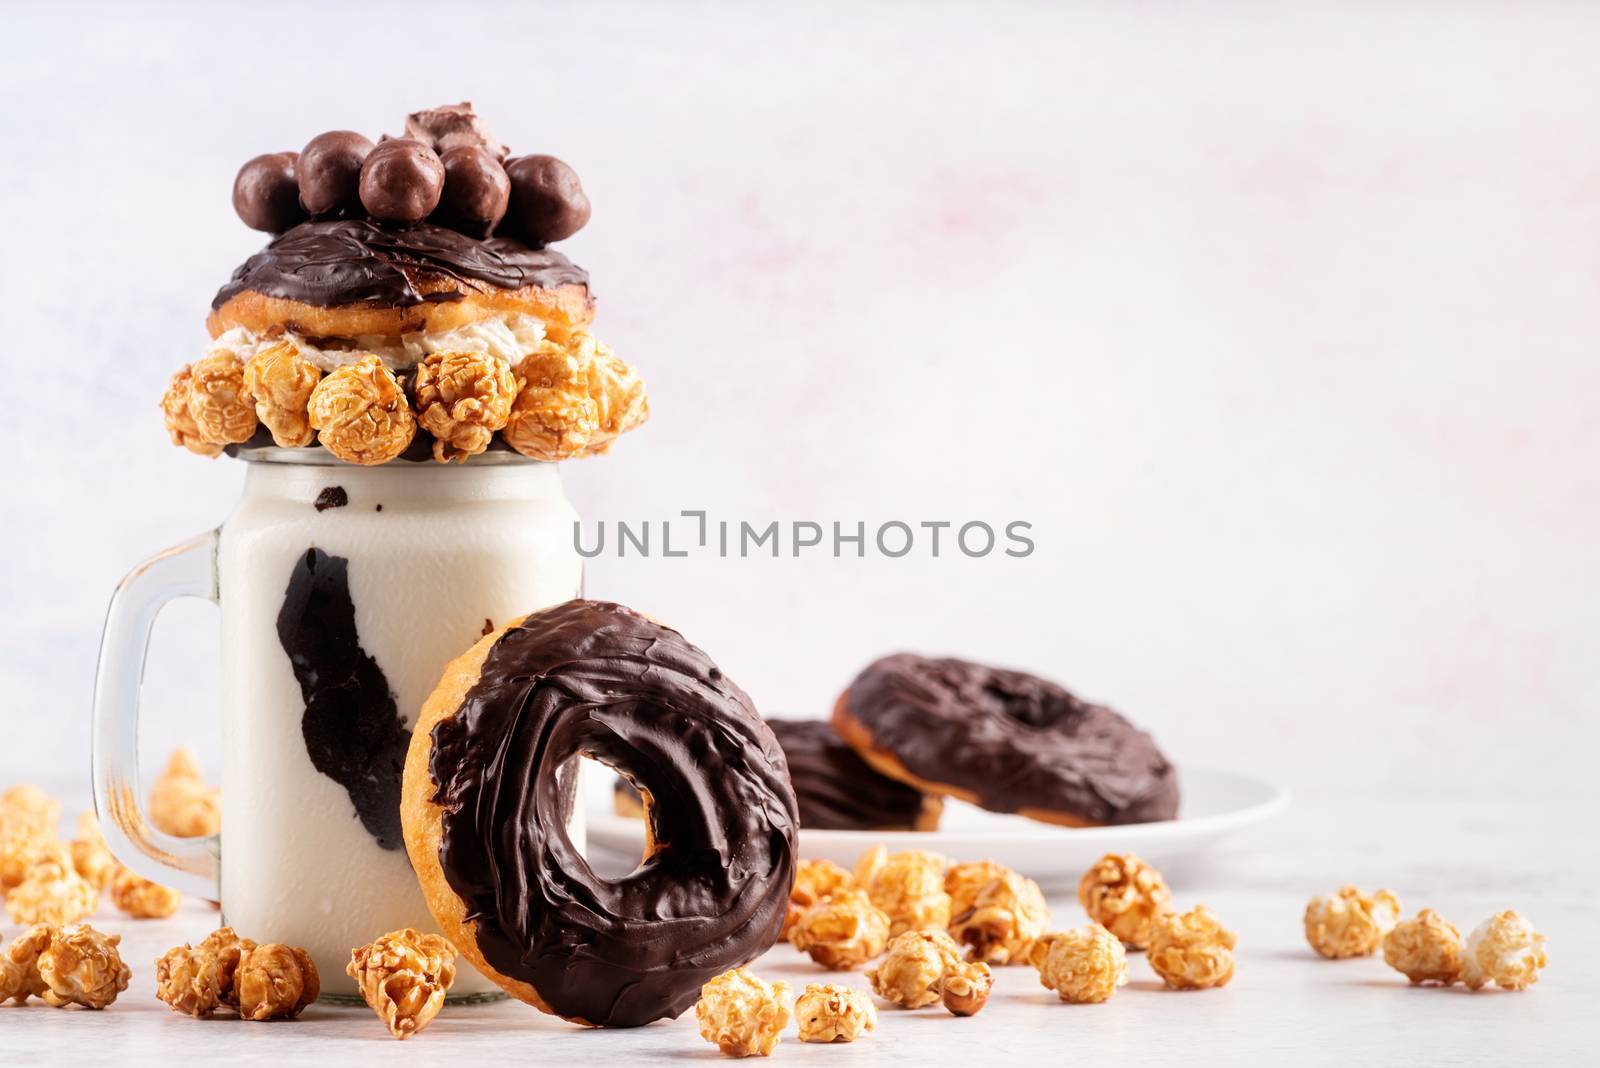 Chocolate donut milkshake decorated with caramel popcorn, whipped cream and candies by Desperada